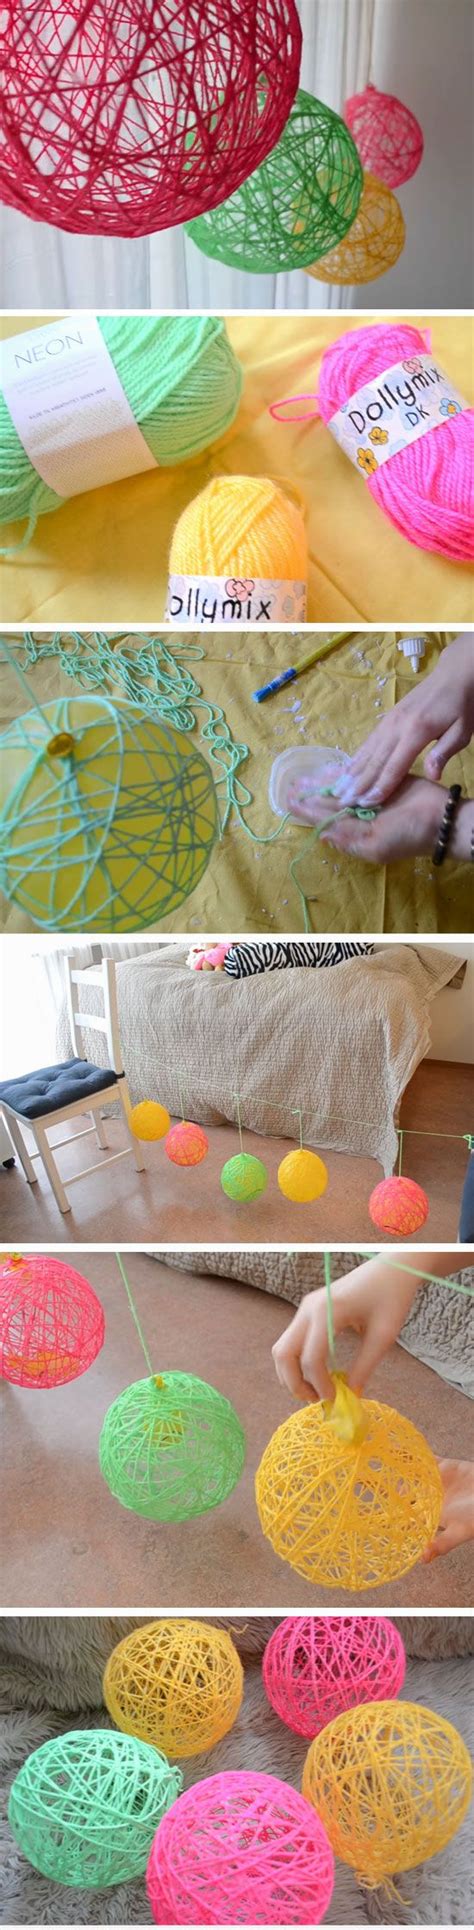 Diy room decor ideas fun science with a blast from the past. Pin on room decor